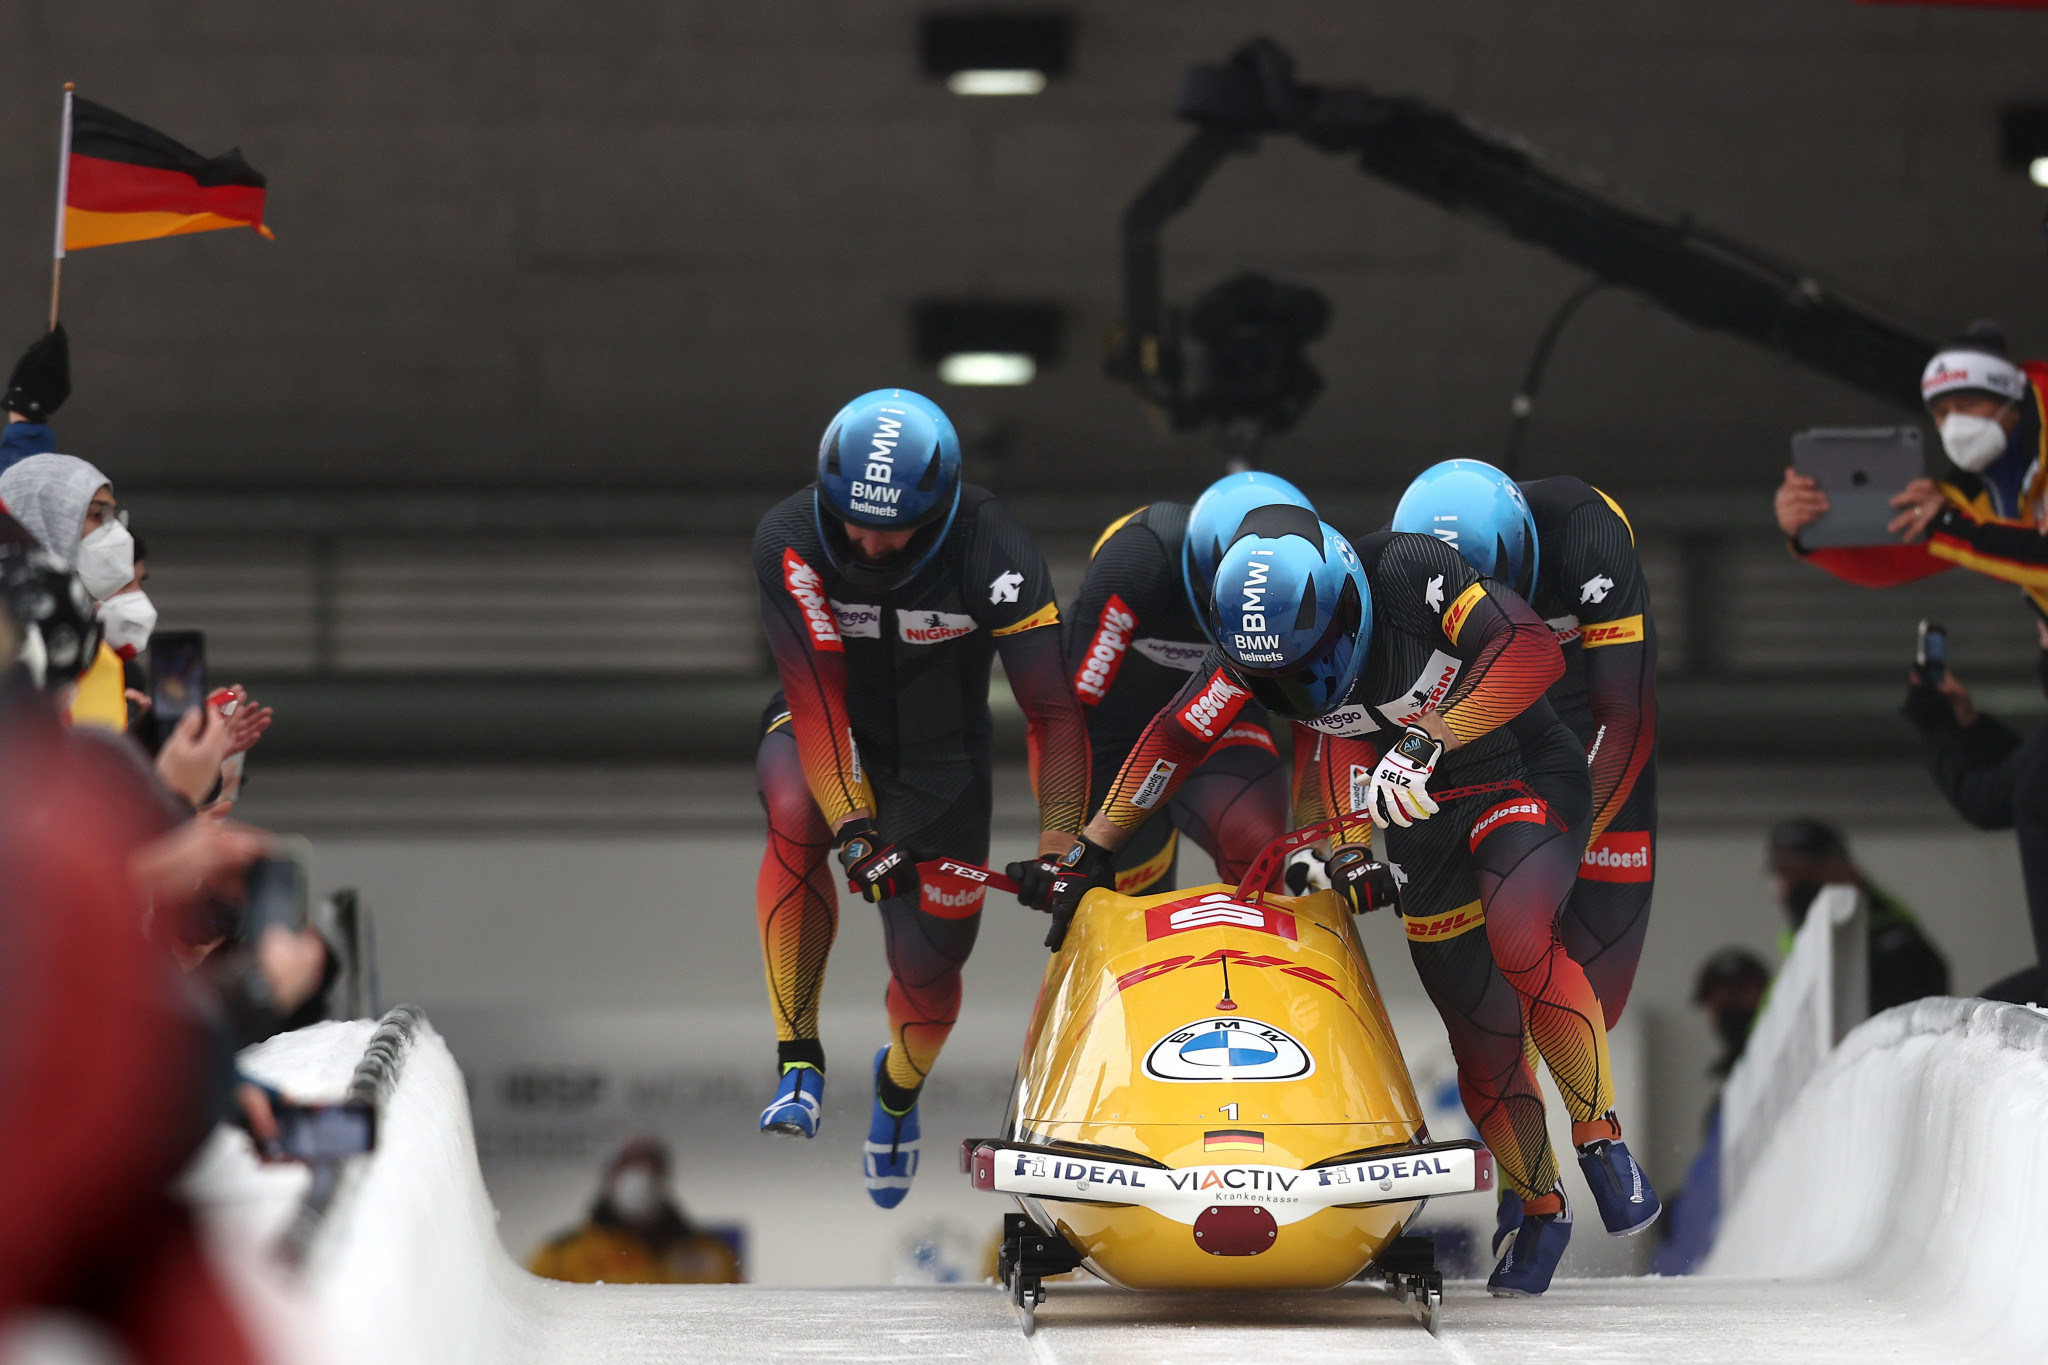 Francesco Friedrich already has the four-man bobsleigh title wrapped up ©Getty Images
